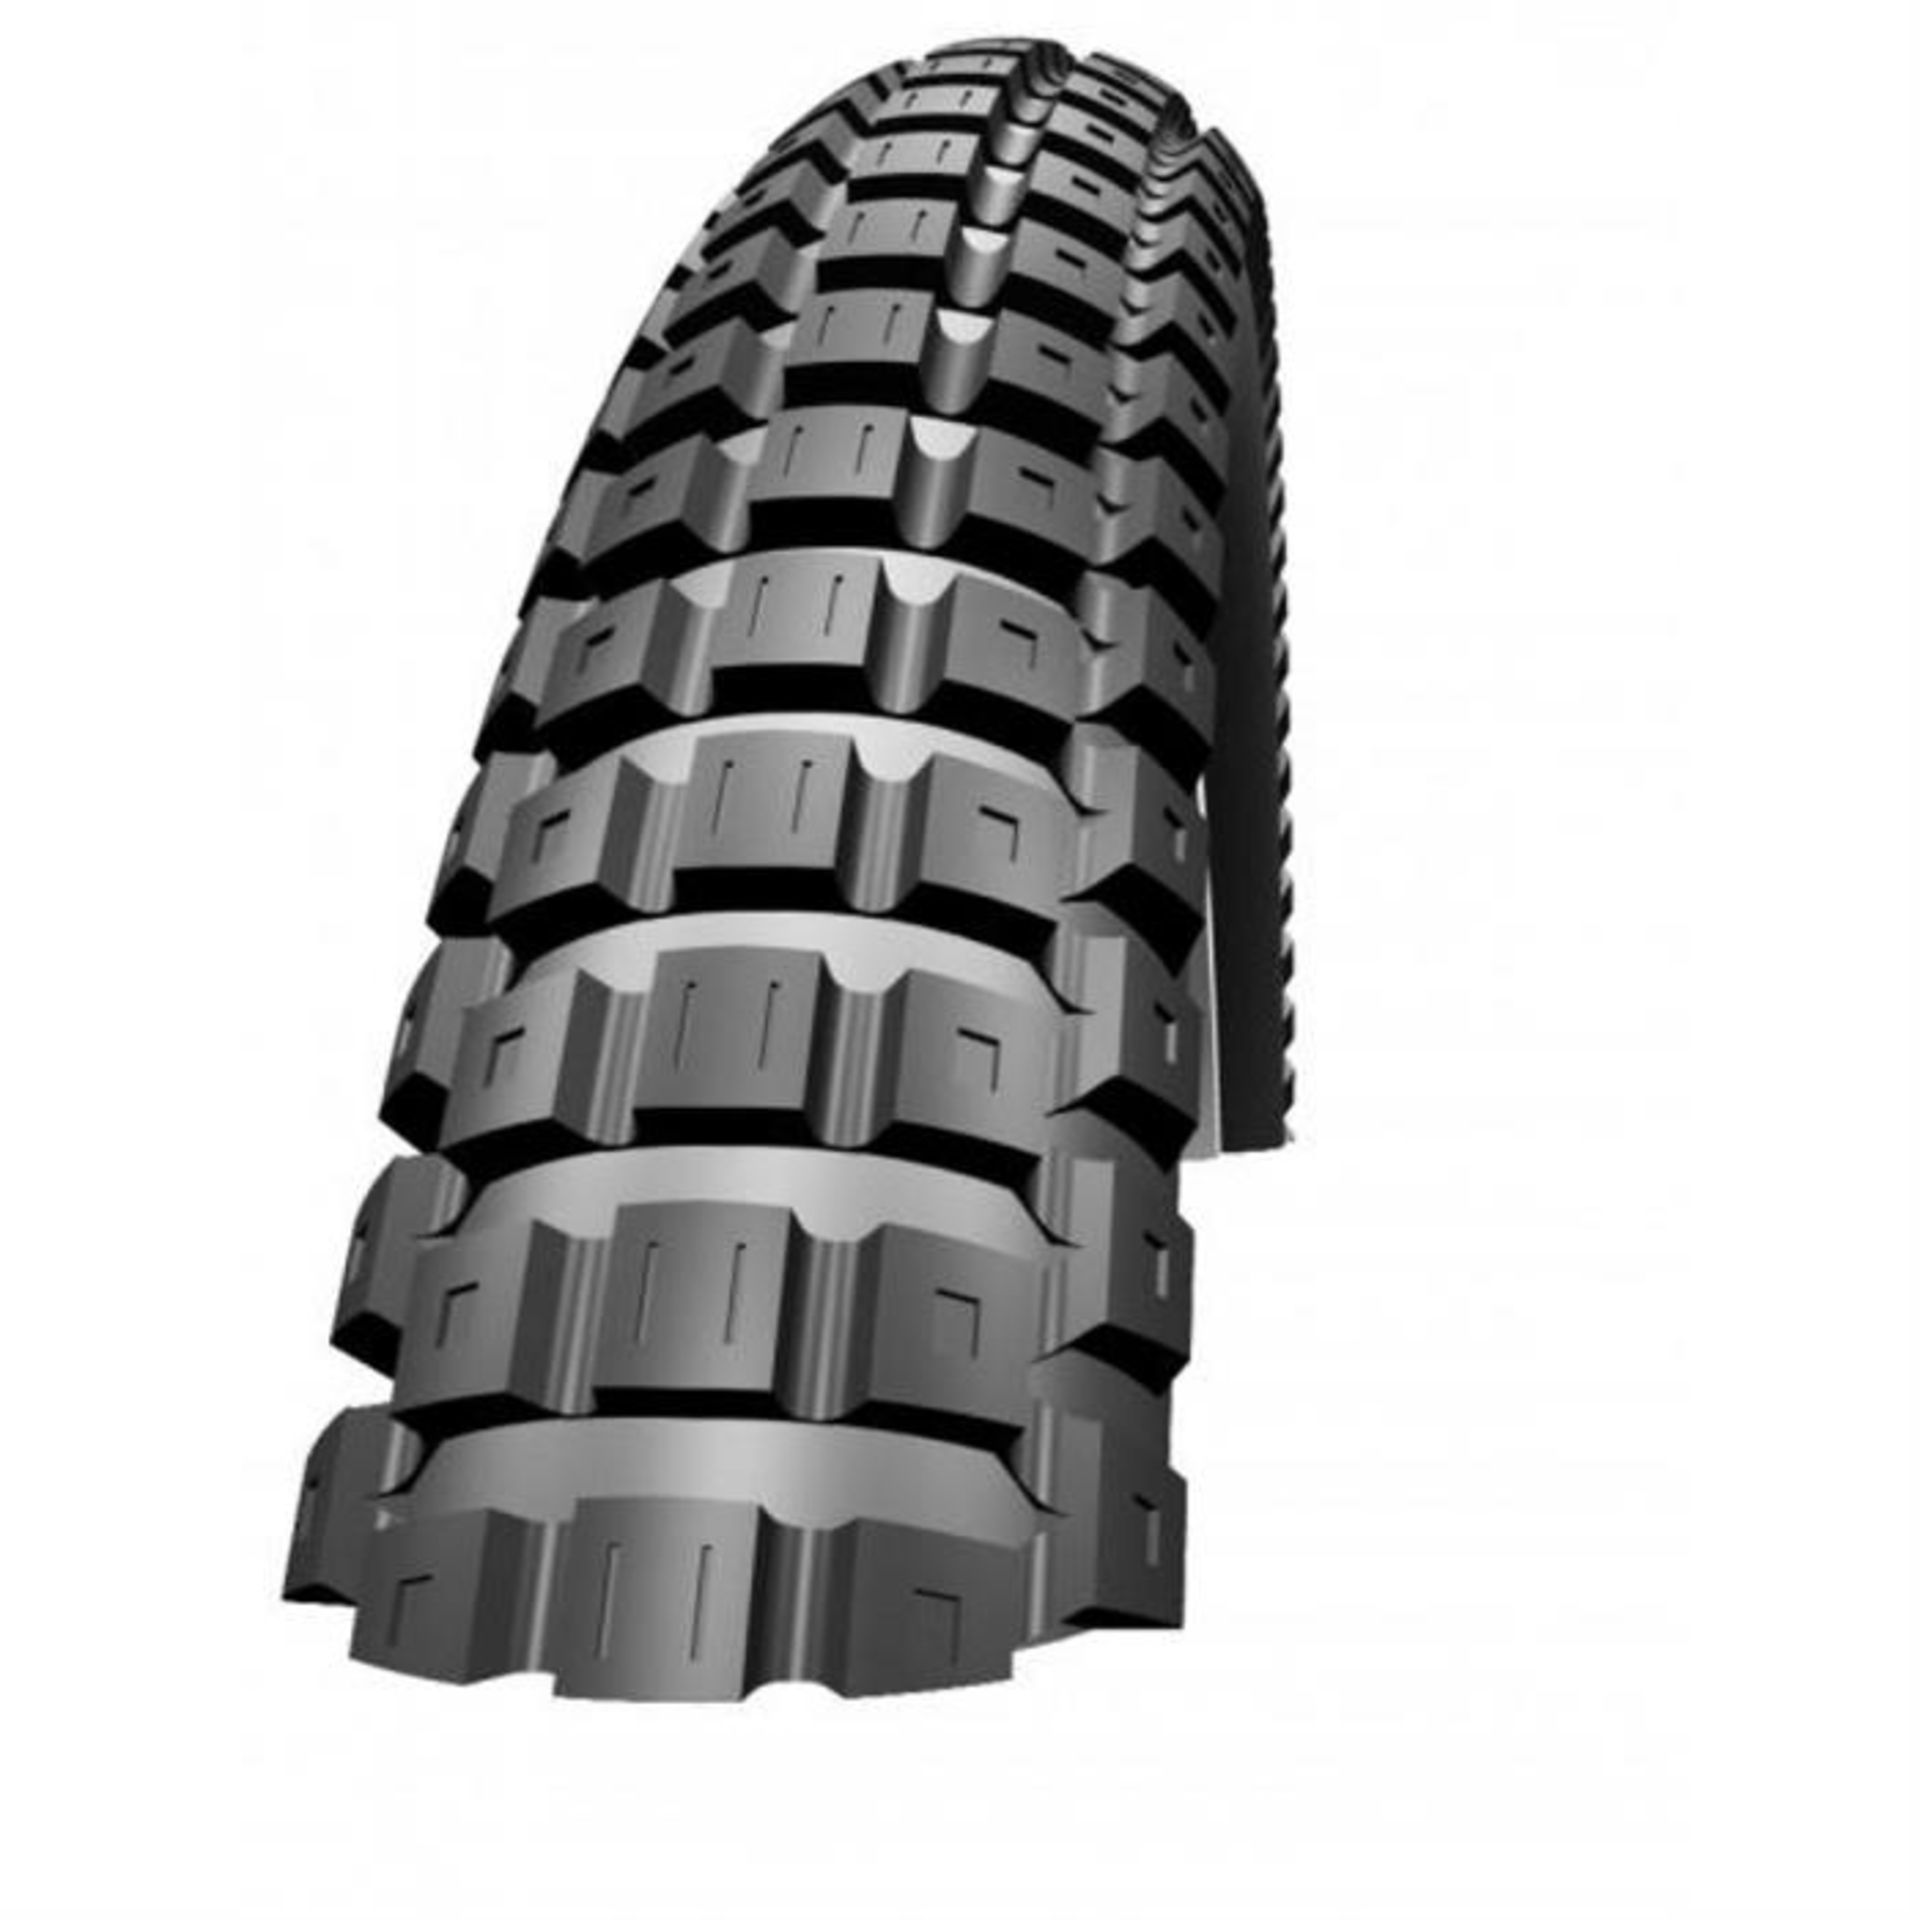 24 x Cycling Tyres in Various Sizes and Styles - Please see list for more information RRP £392.74 - Image 3 of 5